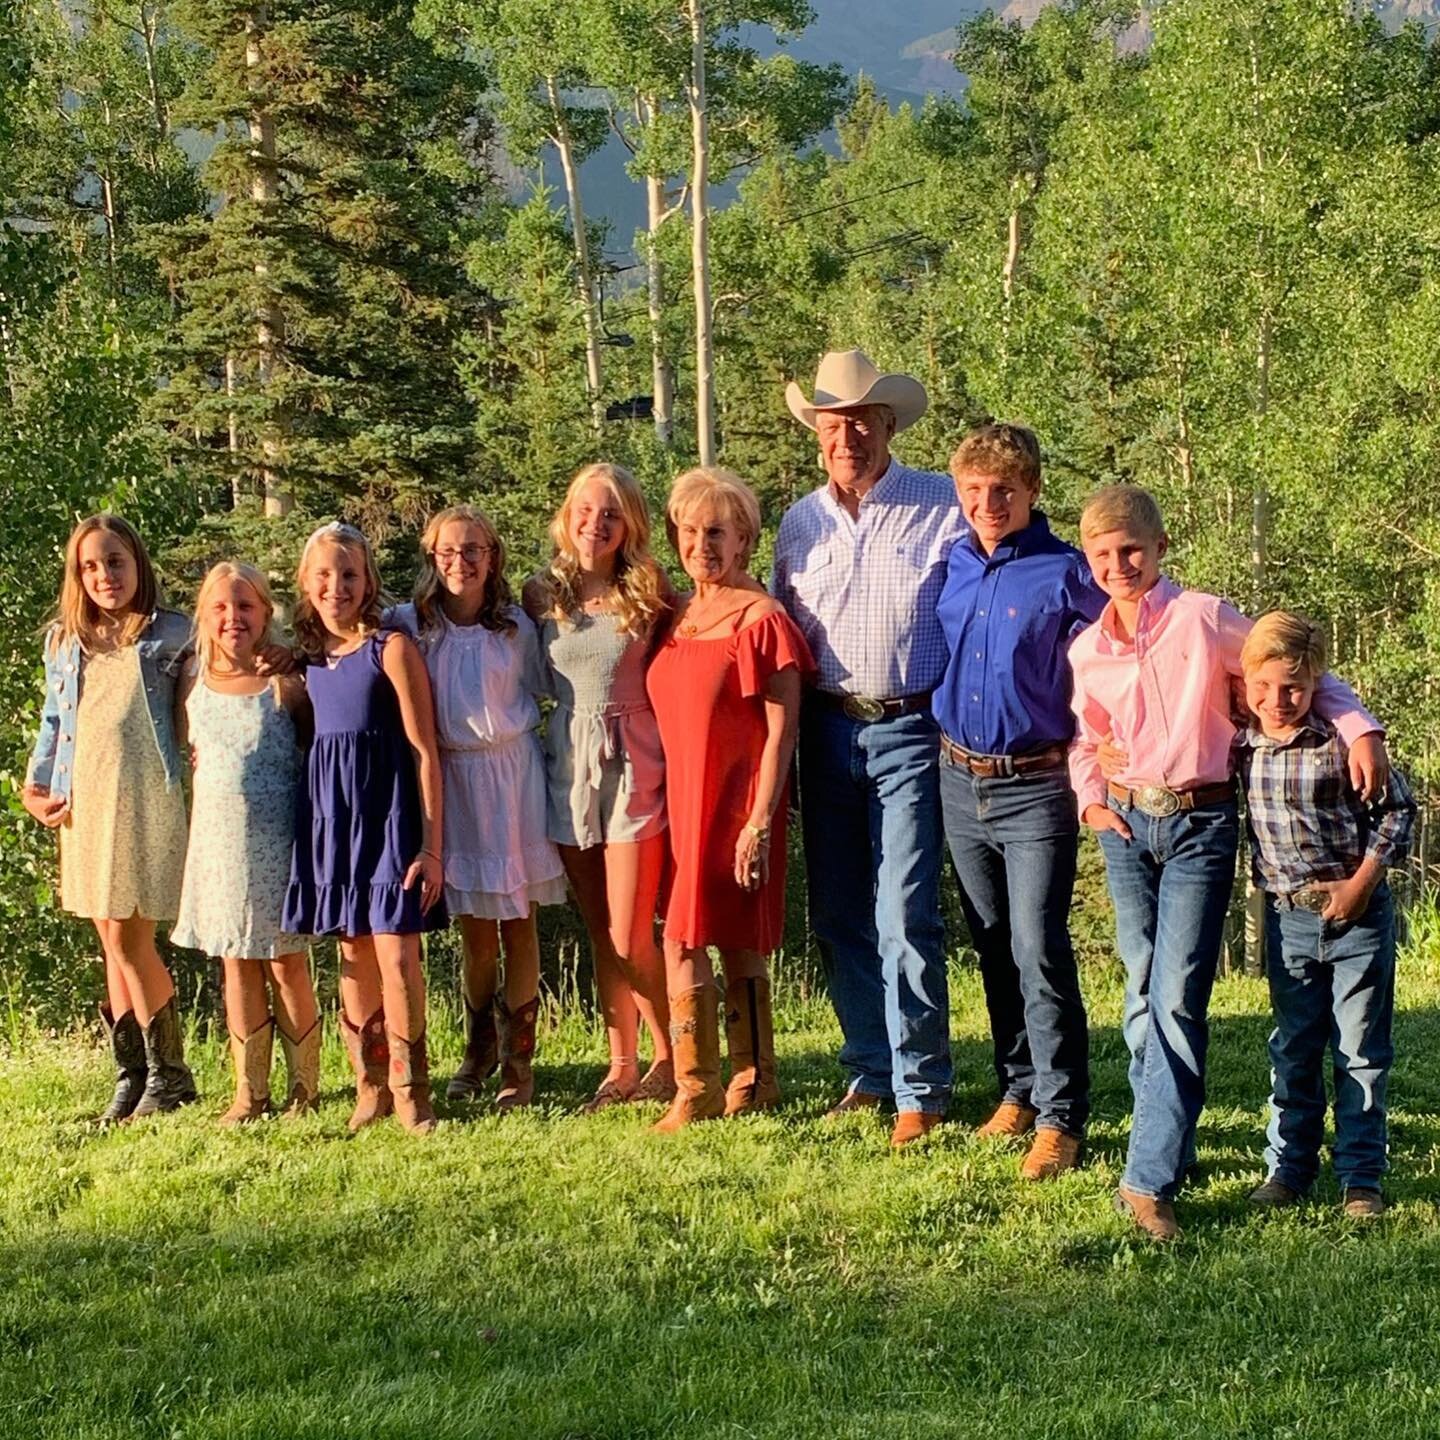 A trip of a lifetime!

I&rsquo;m still soaking it all in. Last week as we celebrated my parents 50th anniversary in Telluride Colorado, every moment was a memory maker!  So thankful for their amazing love story and the legacy they have created!

I kn